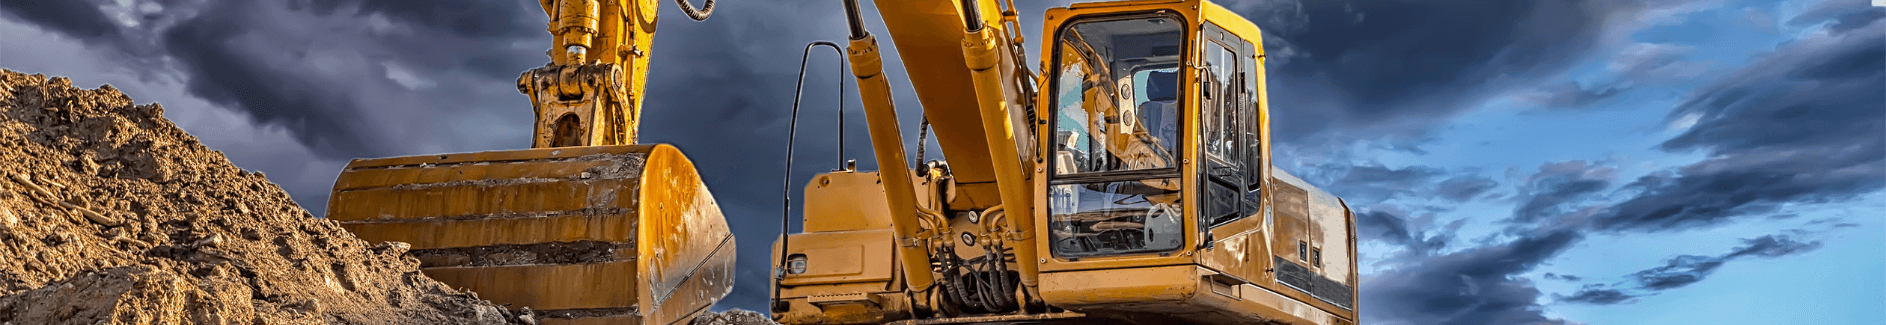 yellow construction digger tractor heavy equipment